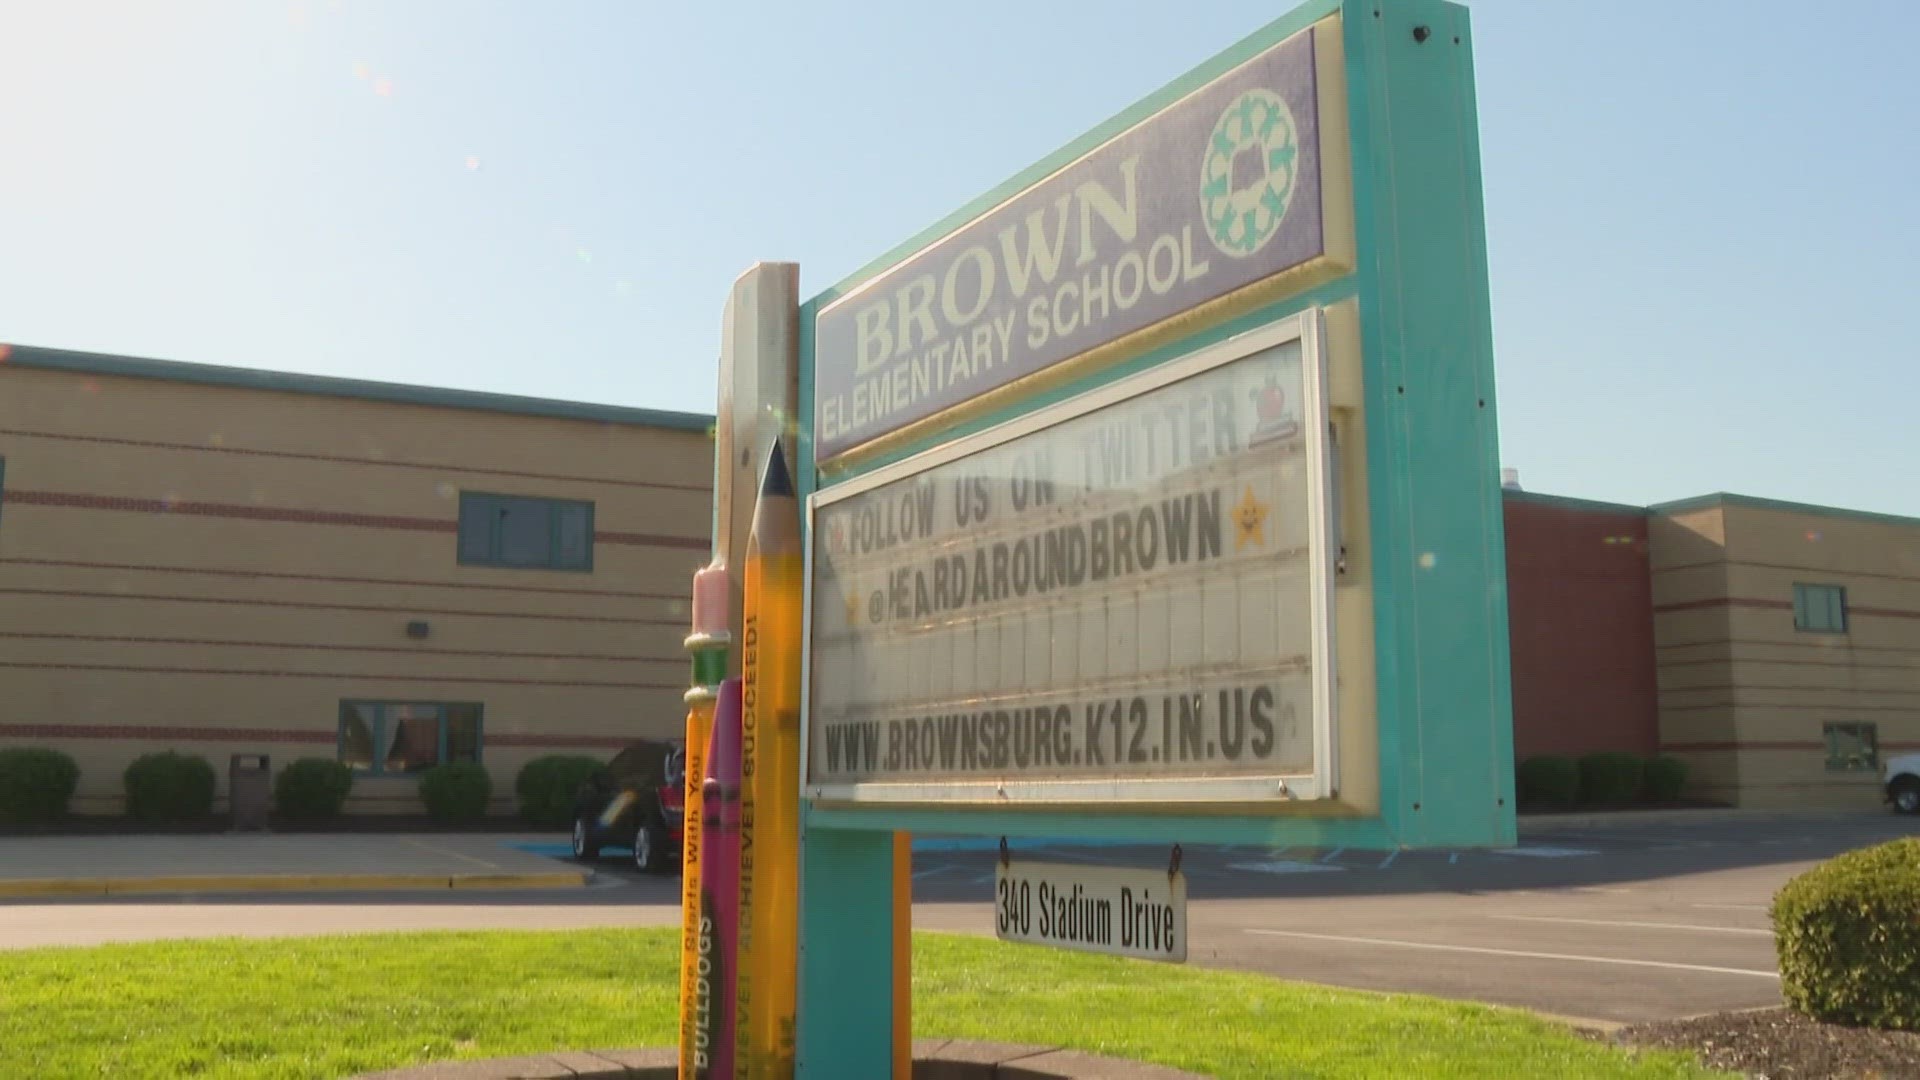 Five teachers and aides are named in a tort claim by the parents of a 7-year-old student who was reportedly told to eat his own vomit at school.